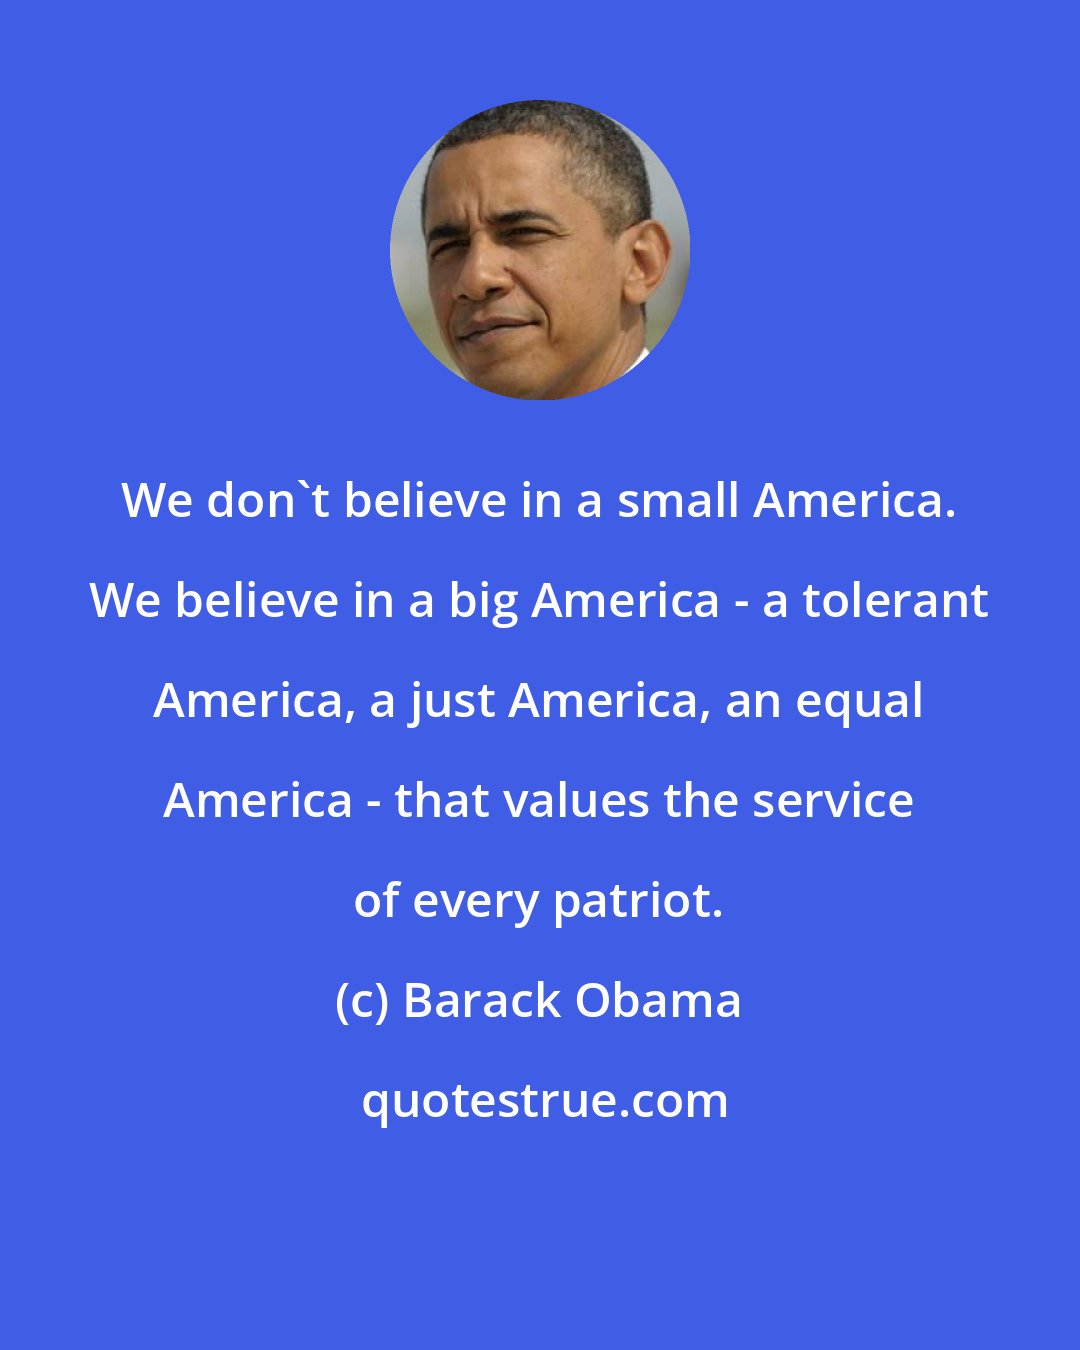 Barack Obama: We don't believe in a small America. We believe in a big America - a tolerant America, a just America, an equal America - that values the service of every patriot.